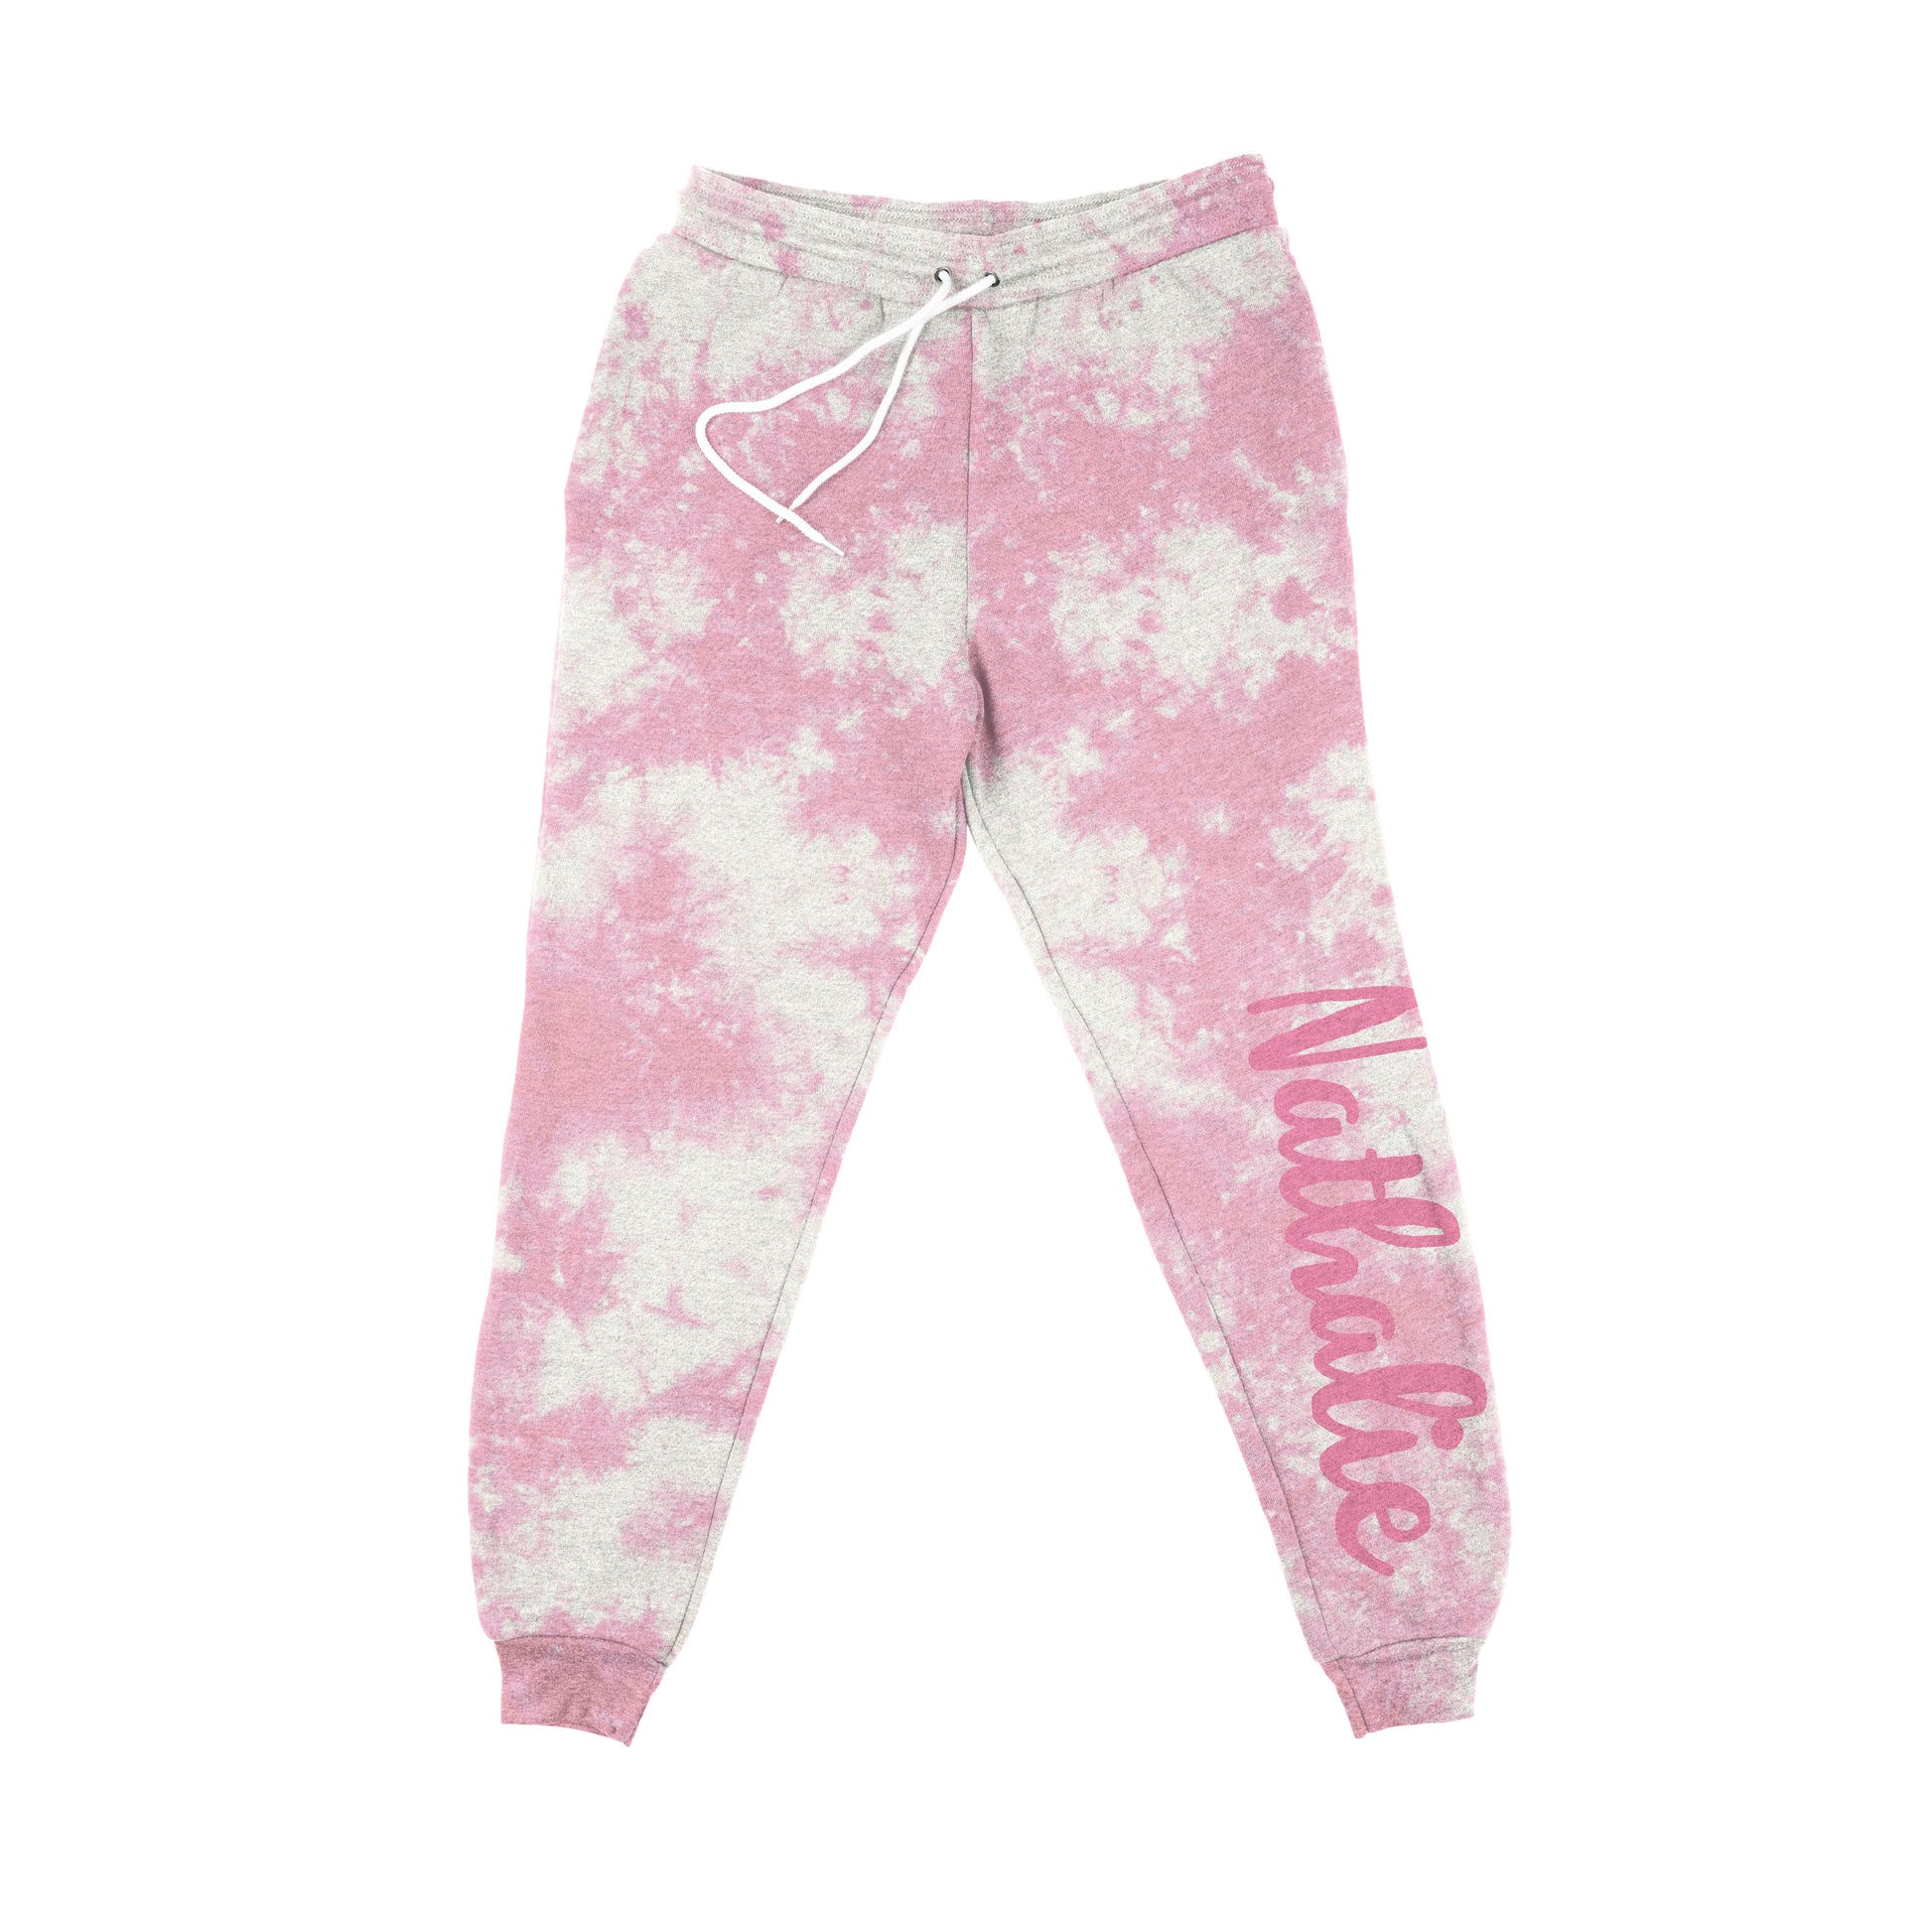 Tie Dye Personalized Name Pink and White Jogger